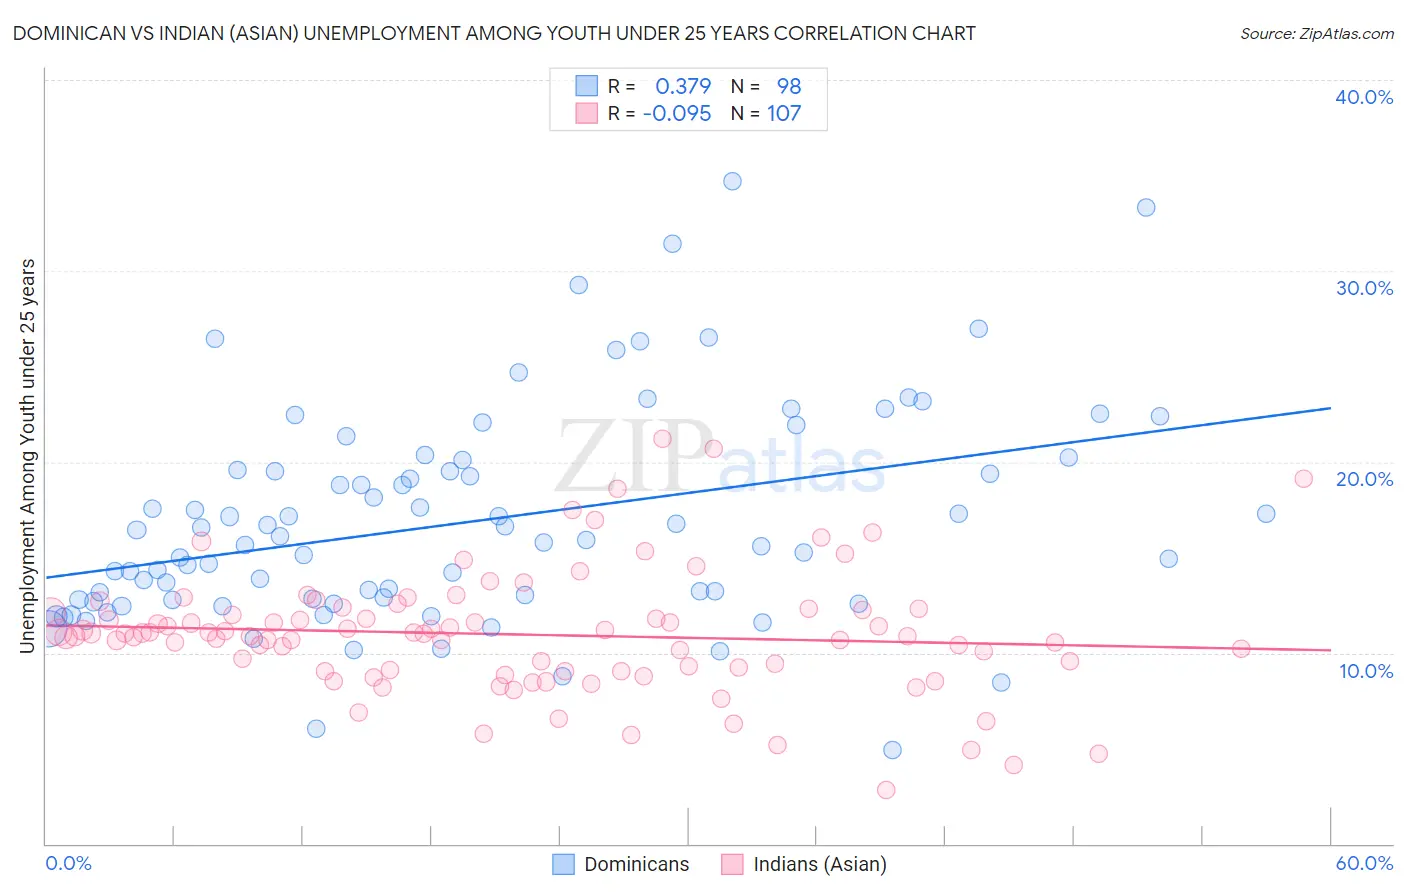 Dominican vs Indian (Asian) Unemployment Among Youth under 25 years